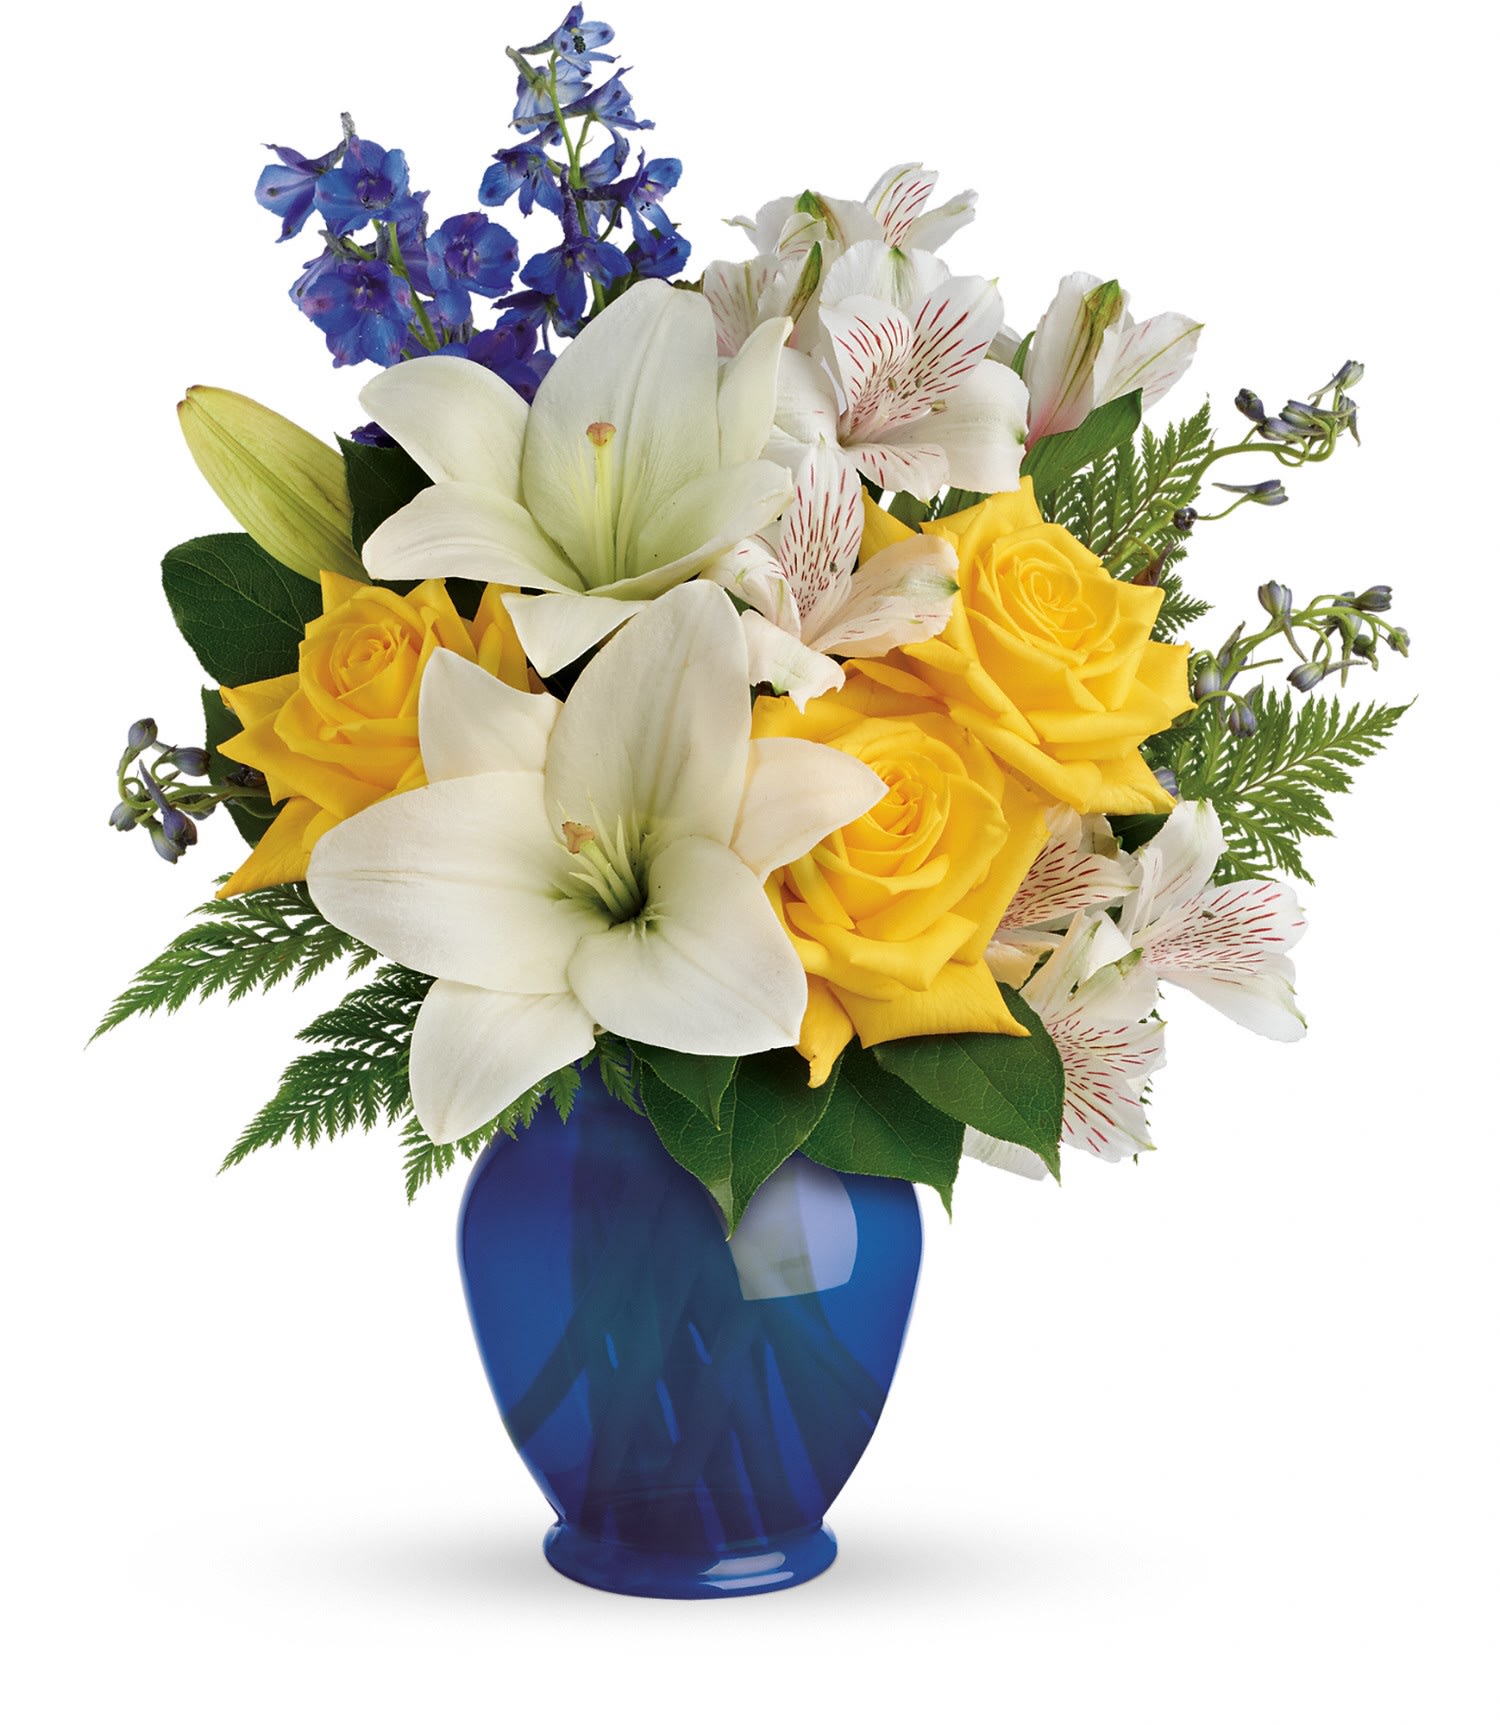 Teleflora's Oceanside Garden Bouquet (TEV47-1A) - Treat them to a day at the shore, in the comfort of their home! This invigorating mix of yellow roses, white lilies and blue delphinium captures the spirit and shades of the shoreline. Hand-delivered in a bold blue ginger jar, it's a delightful gift any time of year!